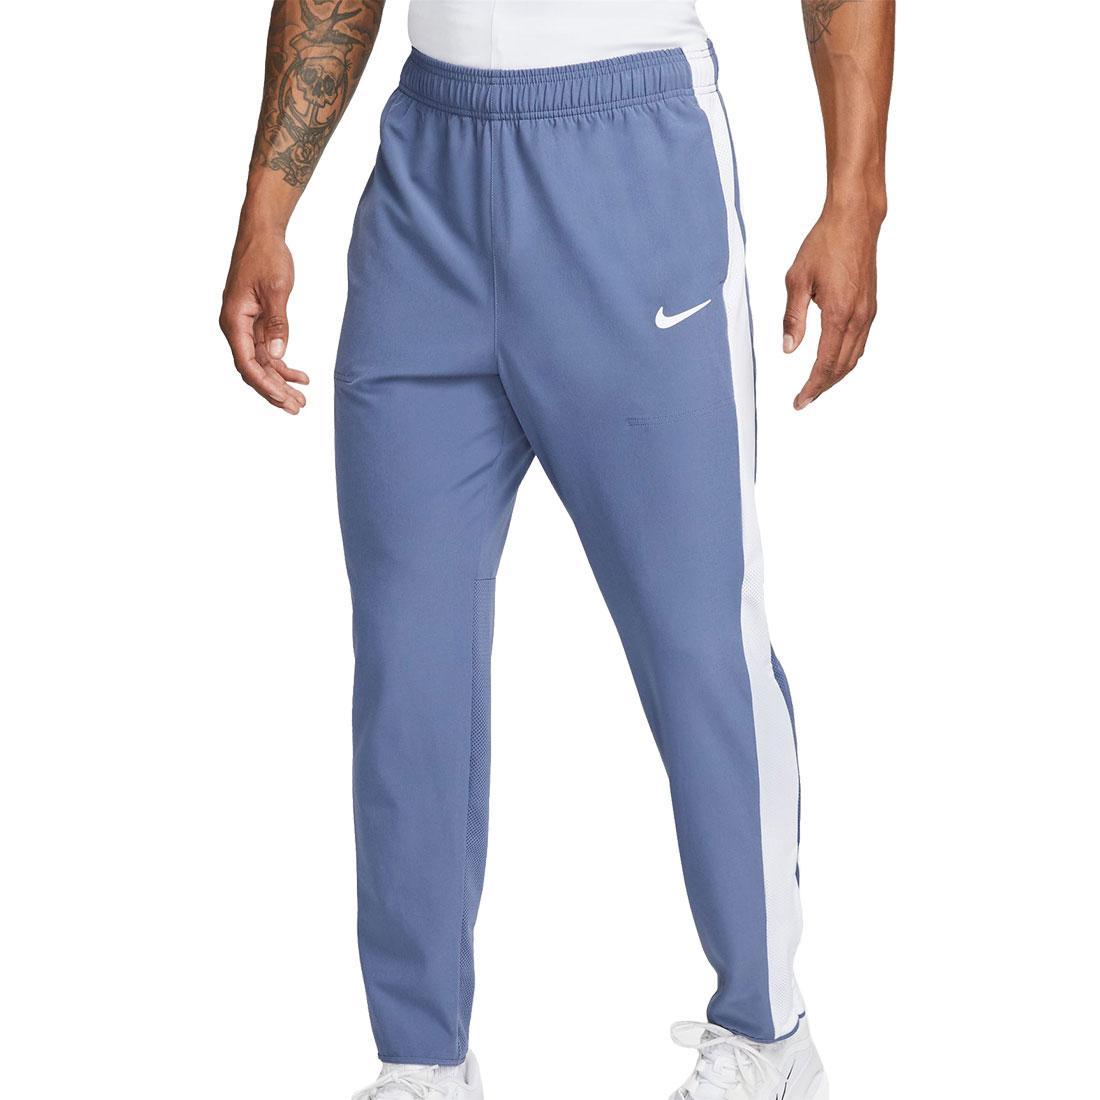 Nike Men`s Advantage Tennis Pant Diffused Blue and White